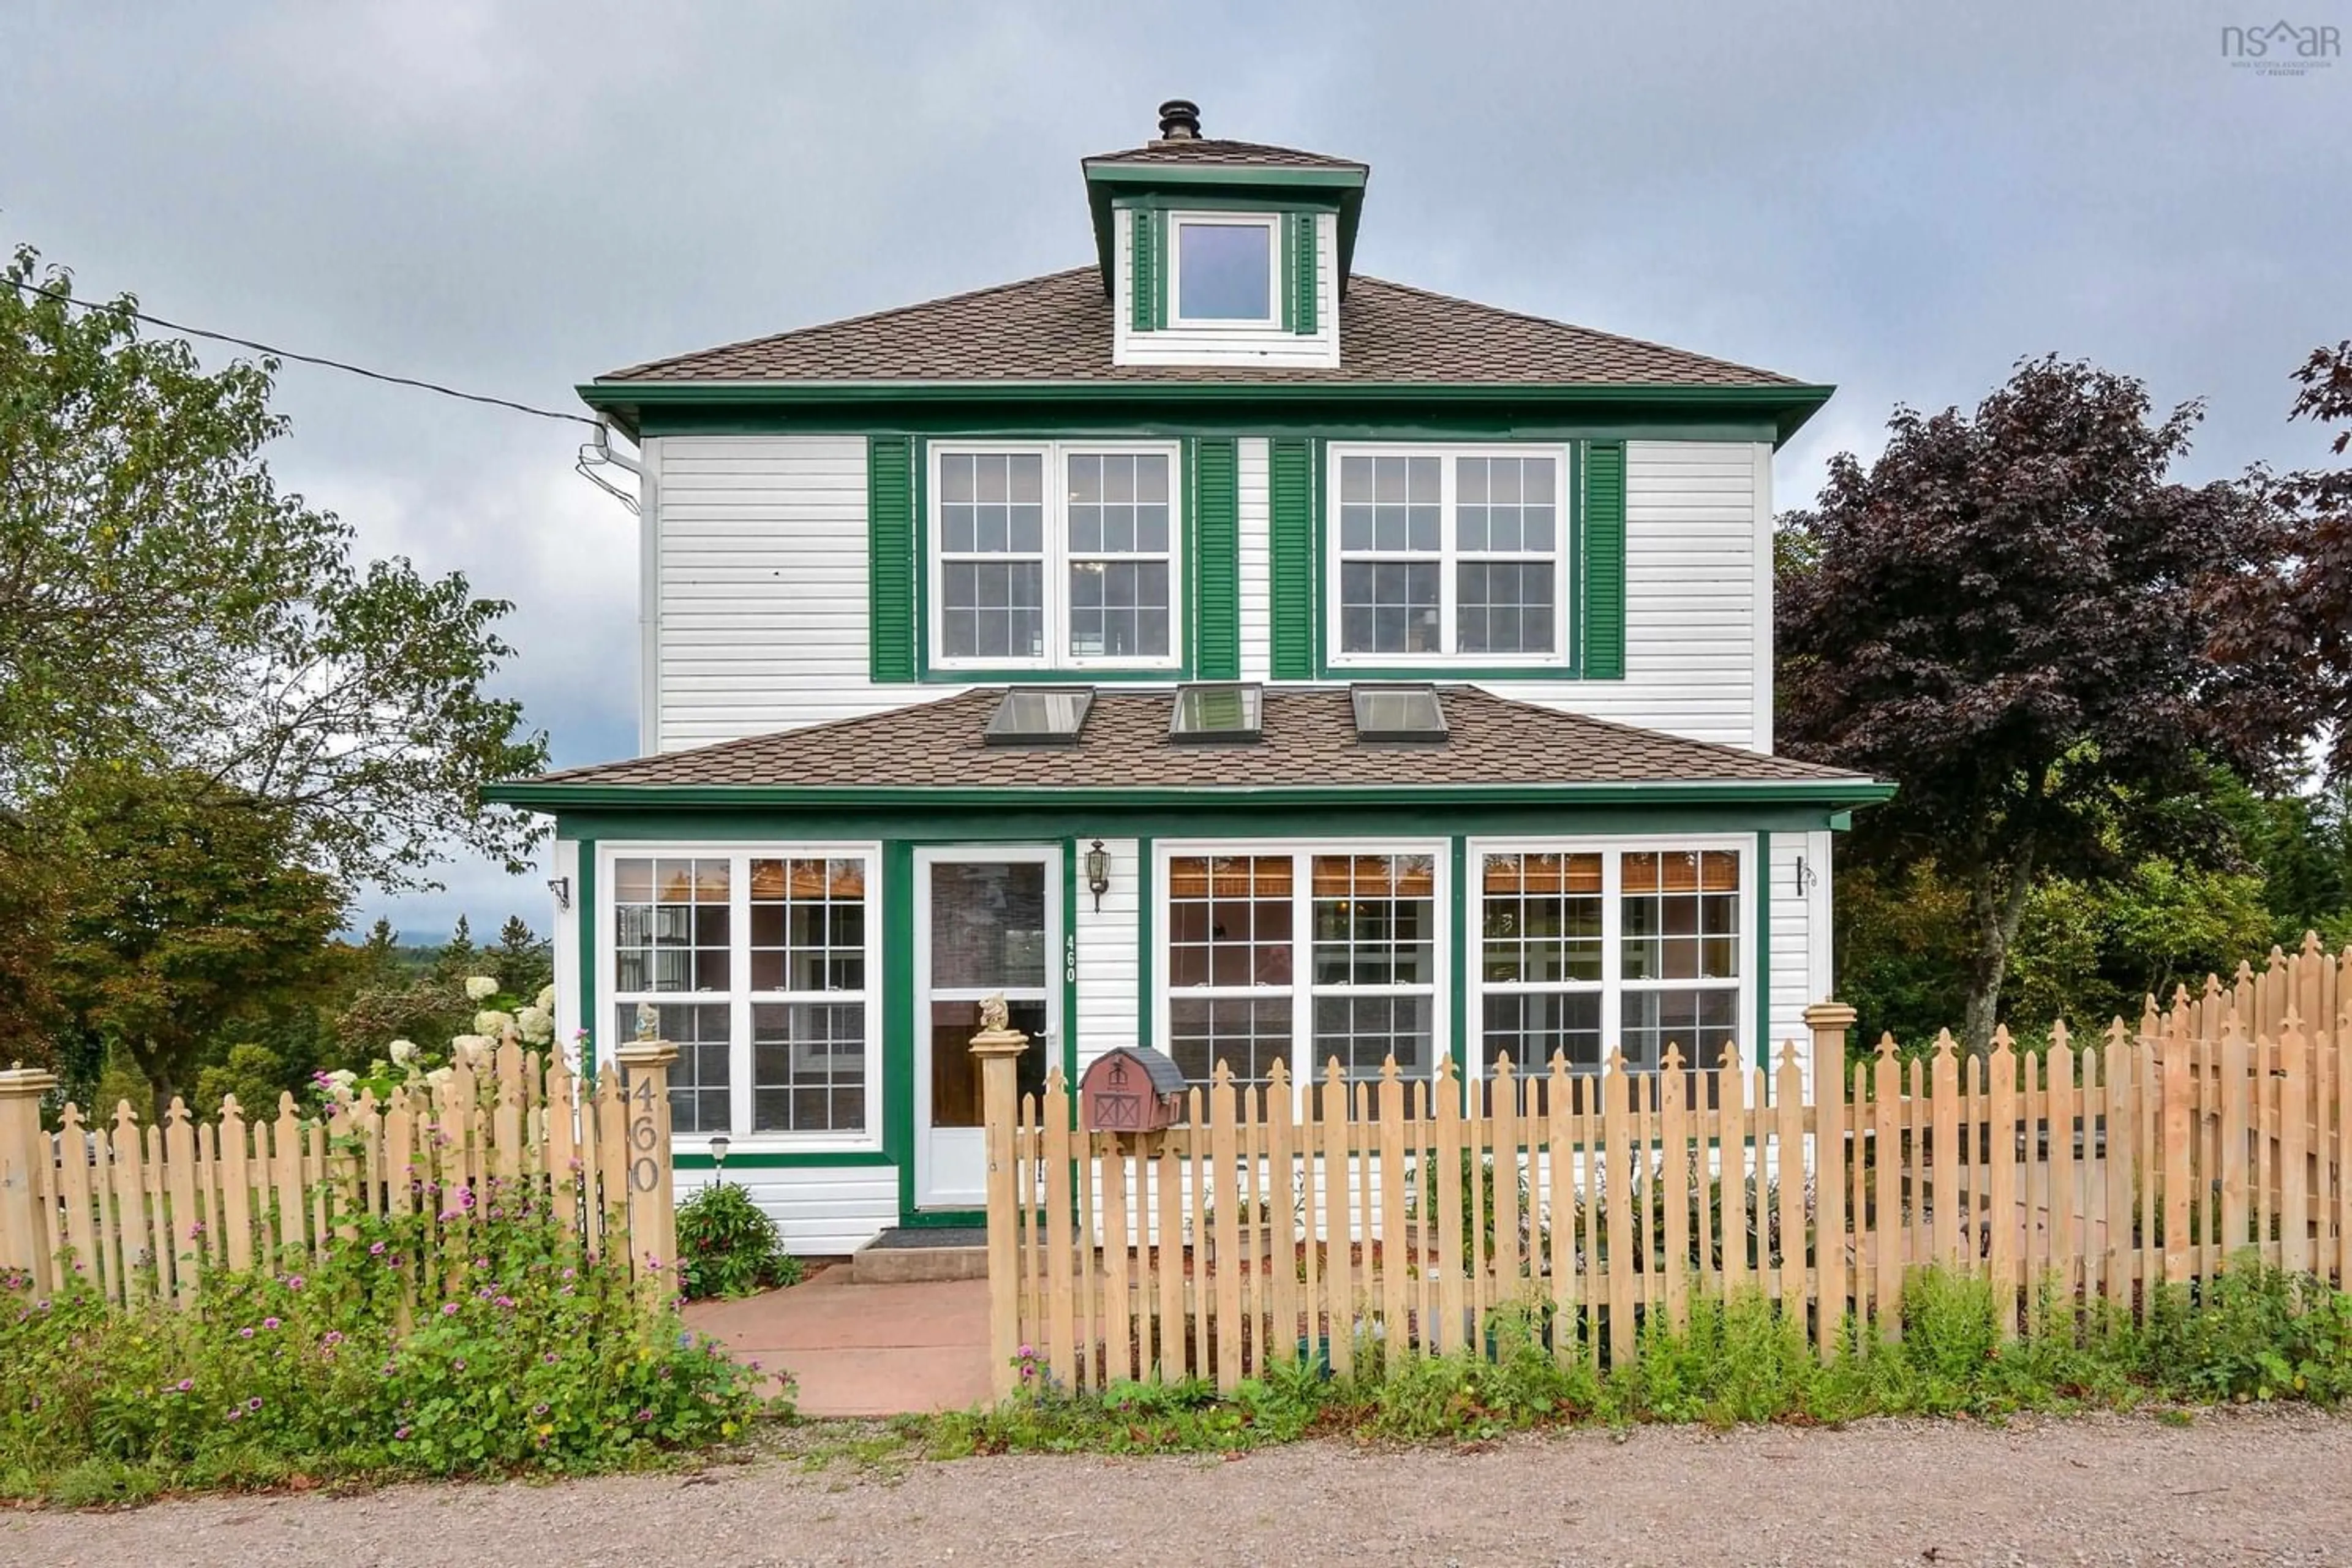 Cottage for 460 Red Point Rd, Red Point Nova Scotia B2C 1G4